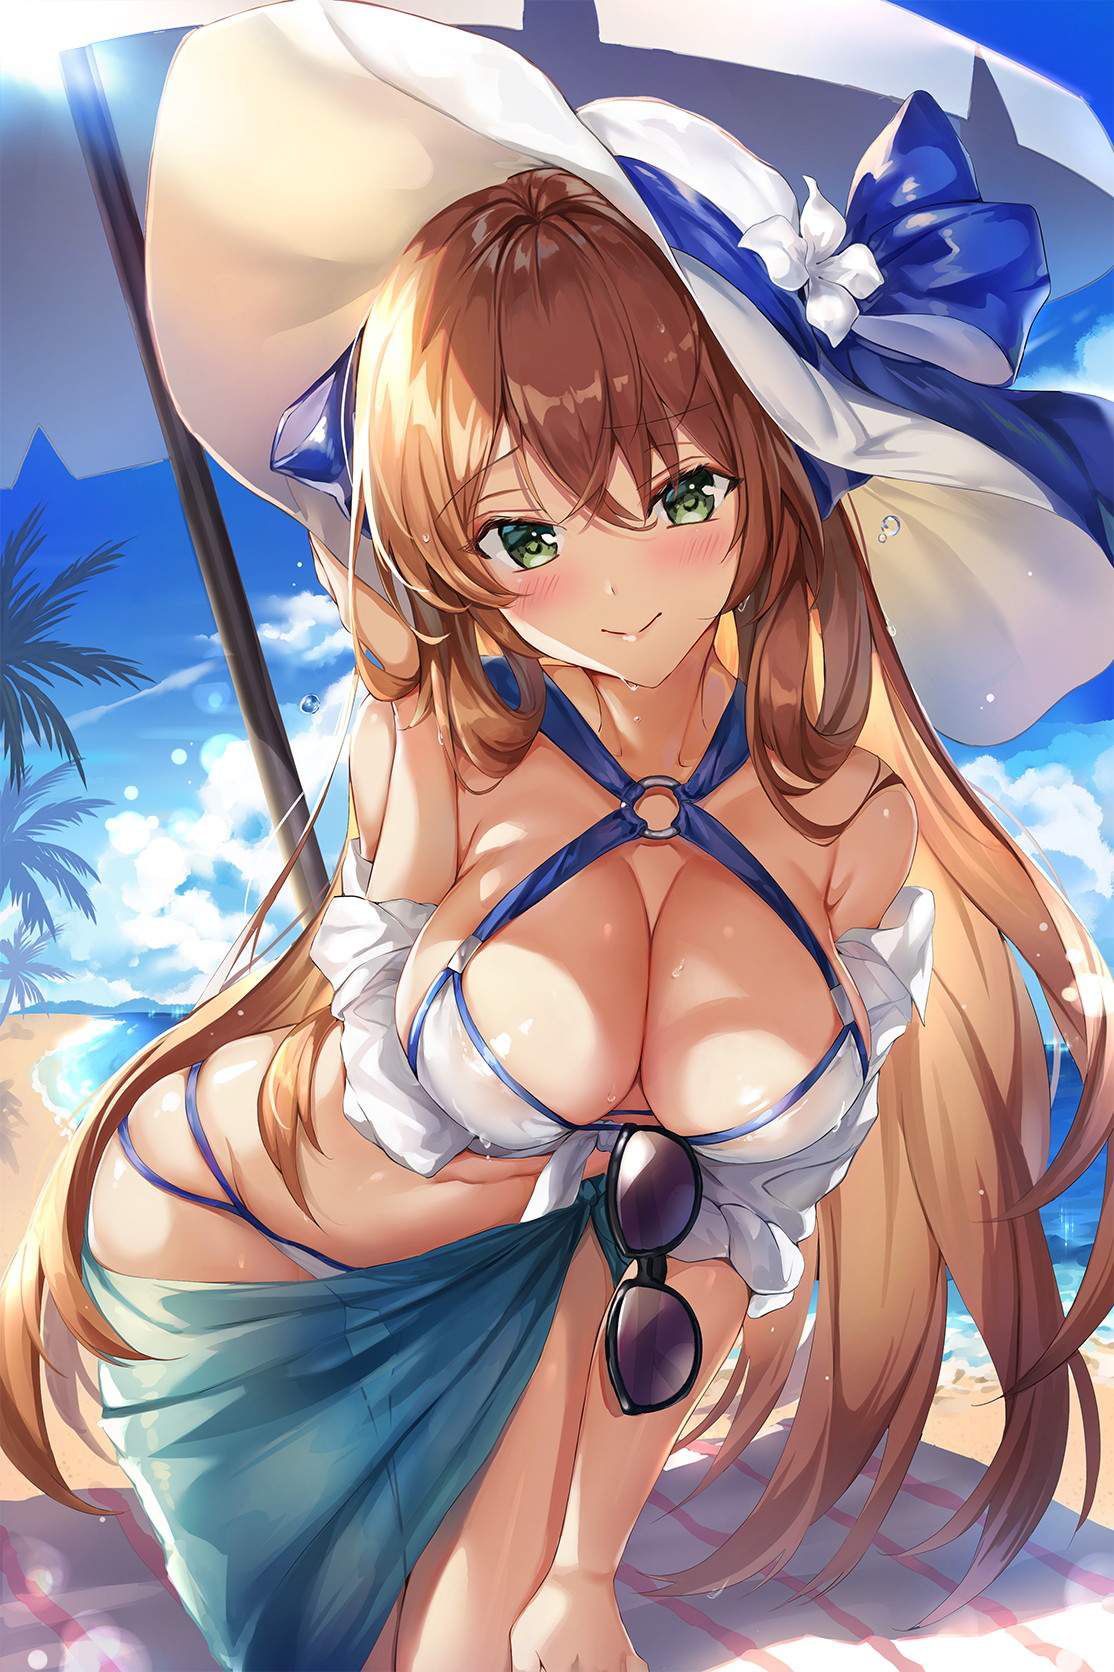 【Dolls Frontline】High-quality erotic images that can be made into Springfield wallpaper (PC / smartphone) 16